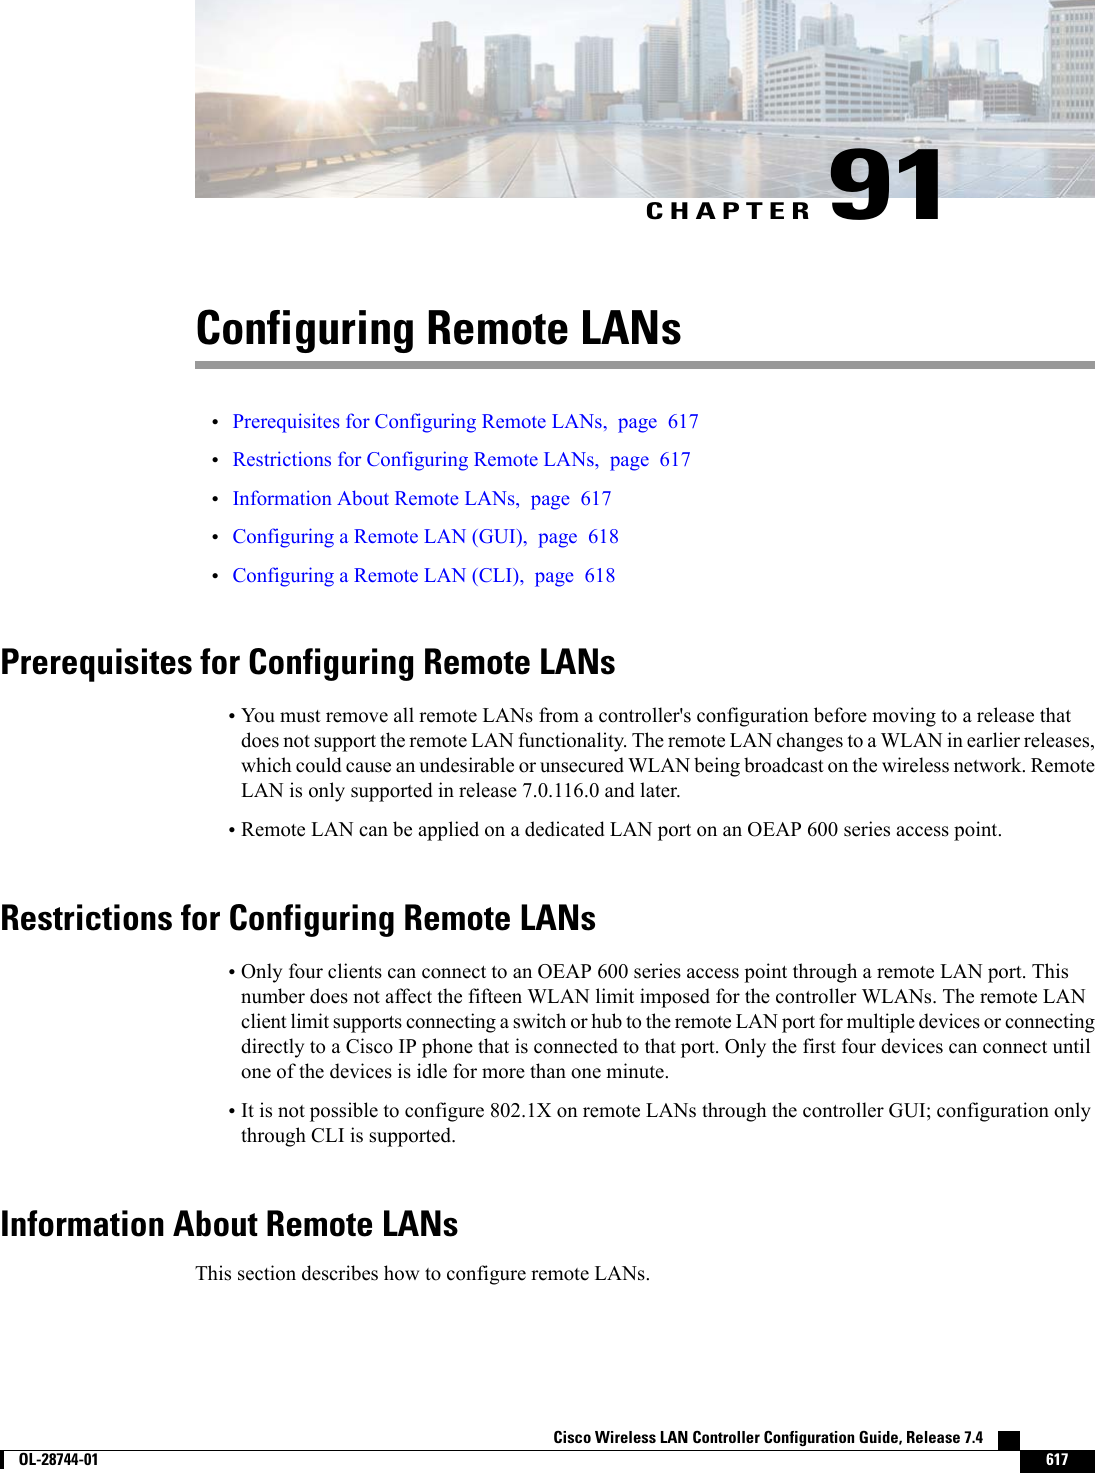 CHAPTER 91Configuring Remote LANs•Prerequisites for Configuring Remote LANs, page 617•Restrictions for Configuring Remote LANs, page 617•Information About Remote LANs, page 617•Configuring a Remote LAN (GUI), page 618•Configuring a Remote LAN (CLI), page 618Prerequisites for Configuring Remote LANs•You must remove all remote LANs from a controller&apos;s configuration before moving to a release thatdoes not support the remote LAN functionality. The remote LAN changes to a WLAN in earlier releases,which could cause an undesirable or unsecured WLAN being broadcast on the wireless network. RemoteLAN is only supported in release 7.0.116.0 and later.•Remote LAN can be applied on a dedicated LAN port on an OEAP 600 series access point.Restrictions for Configuring Remote LANs•Only four clients can connect to an OEAP 600 series access point through a remote LAN port. Thisnumber does not affect the fifteen WLAN limit imposed for the controller WLANs. The remote LANclient limit supports connecting a switch or hub to the remote LAN port for multiple devices or connectingdirectly to a Cisco IP phone that is connected to that port. Only the first four devices can connect untilone of the devices is idle for more than one minute.•It is not possible to configure 802.1X on remote LANs through the controller GUI; configuration onlythrough CLI is supported.Information About Remote LANsThis section describes how to configure remote LANs.Cisco Wireless LAN Controller Configuration Guide, Release 7.4        OL-28744-01 617